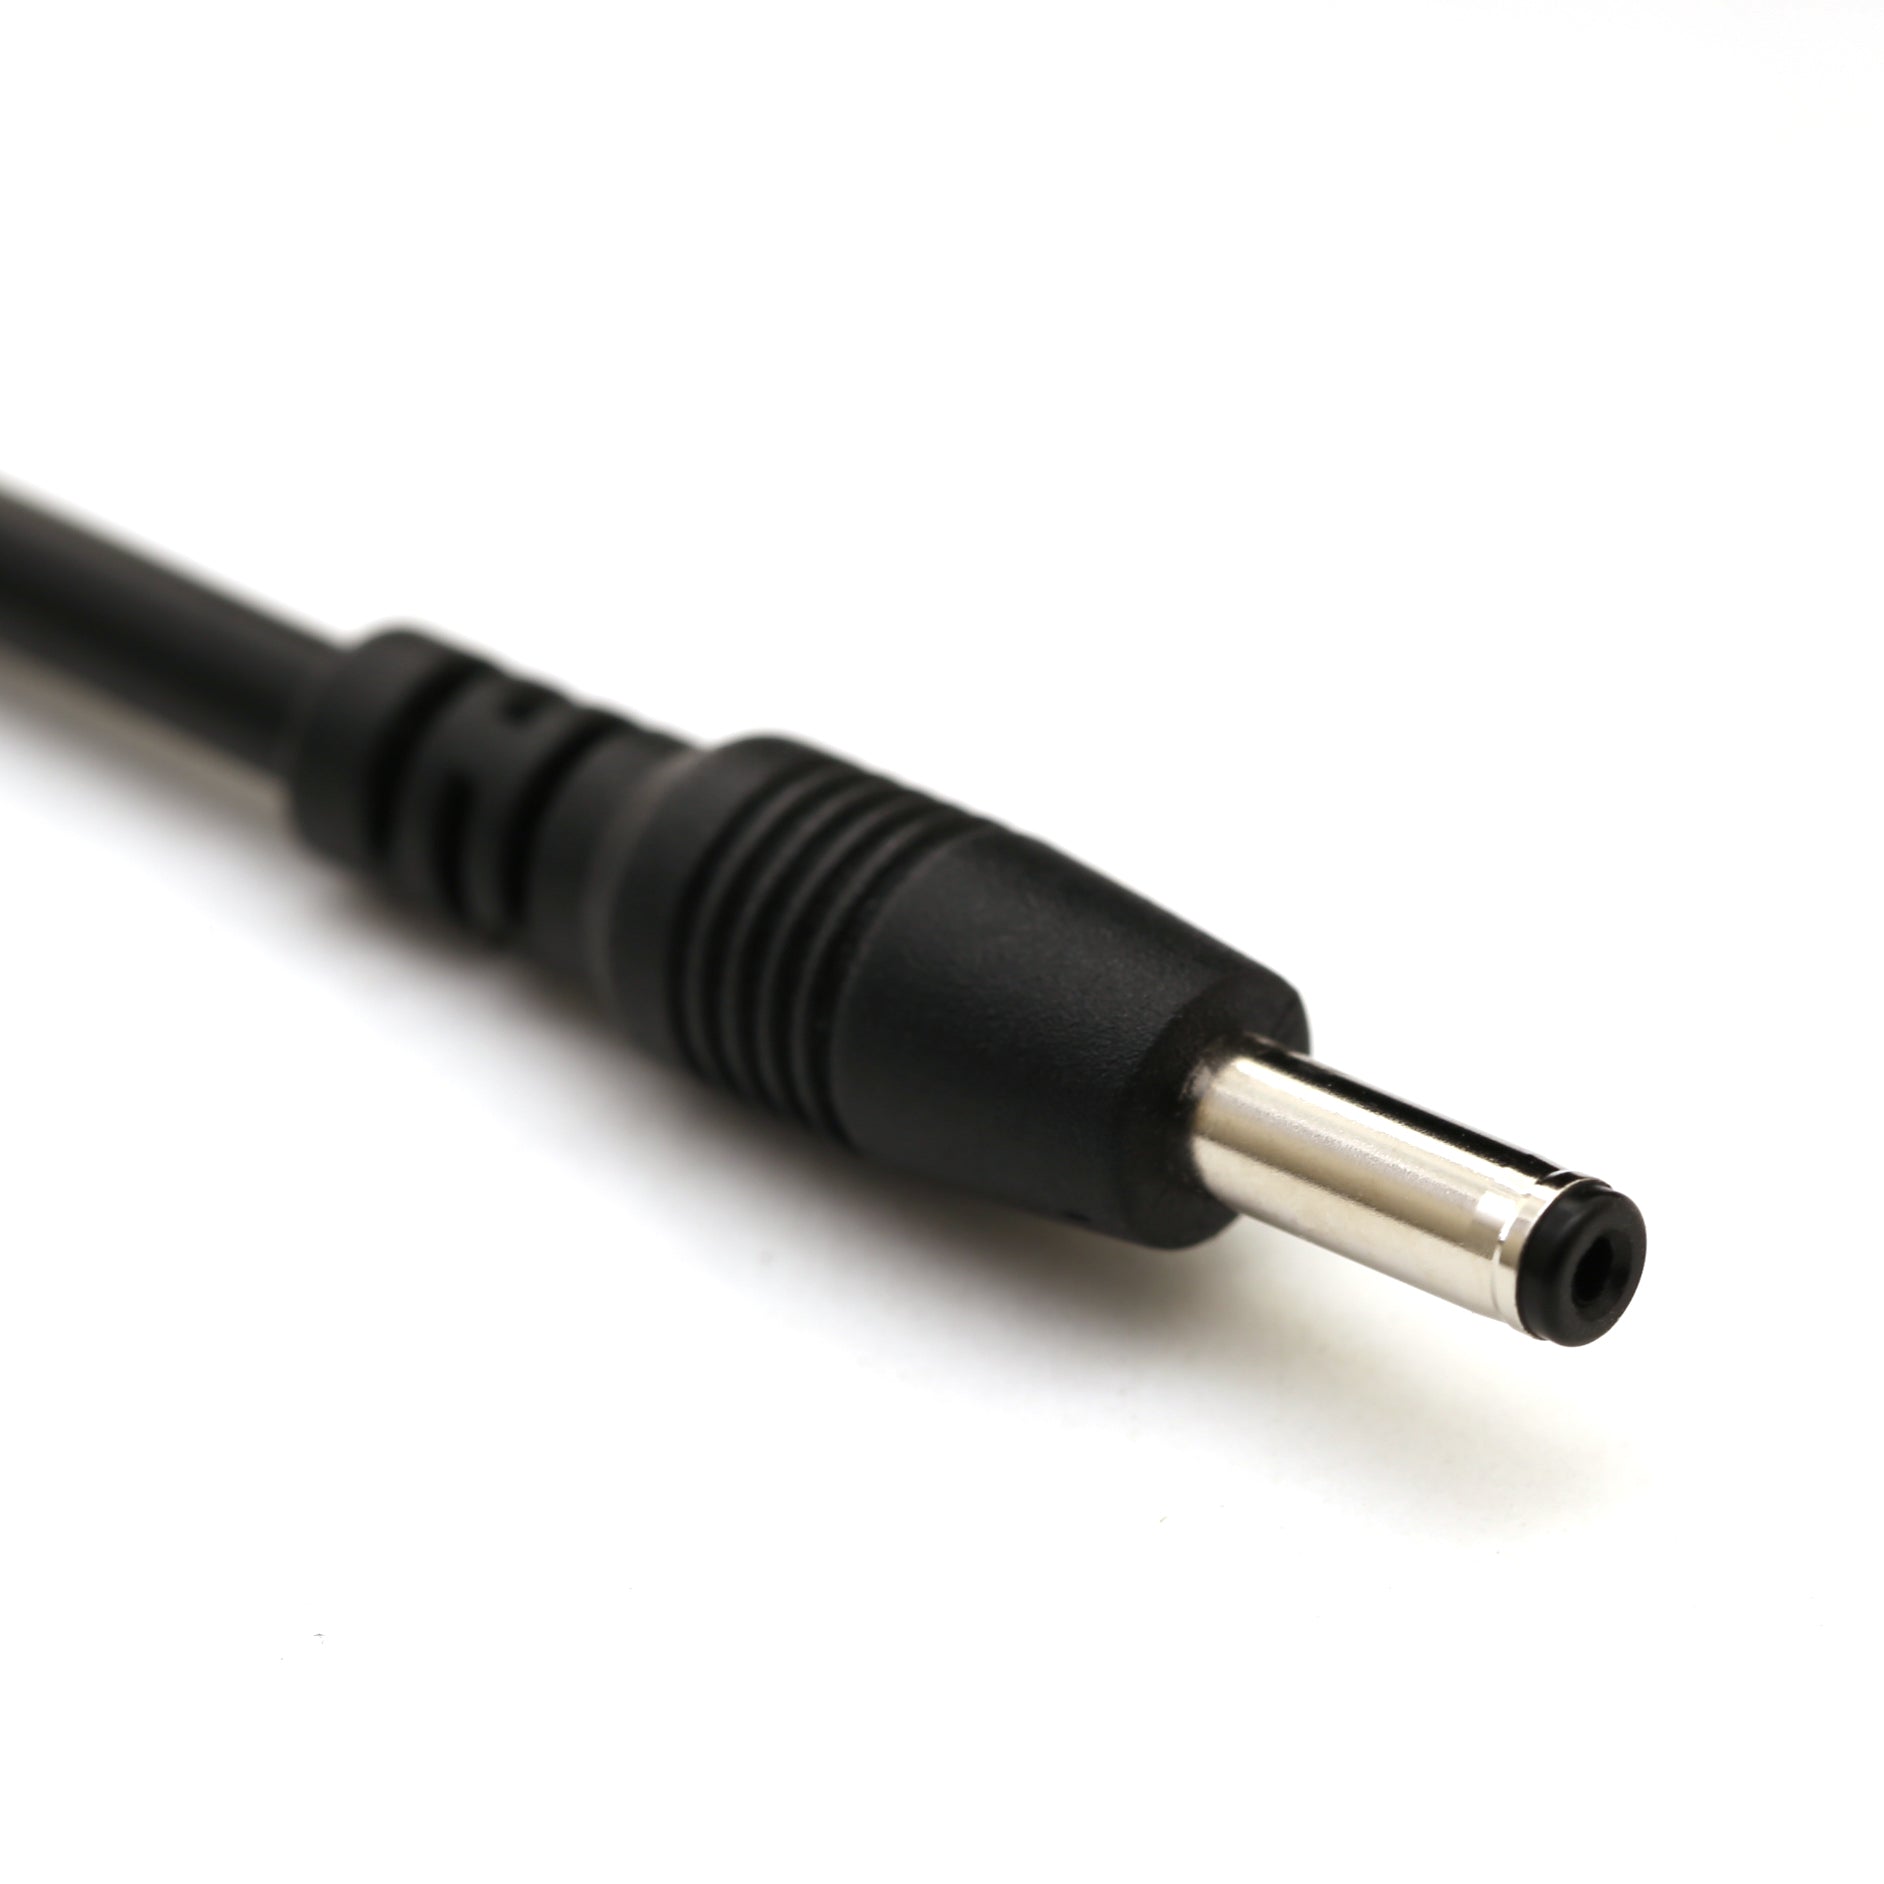 50ft In-Wall Rated Interconnect Cable for Modular LED Under Cabinet Lighting (Black)